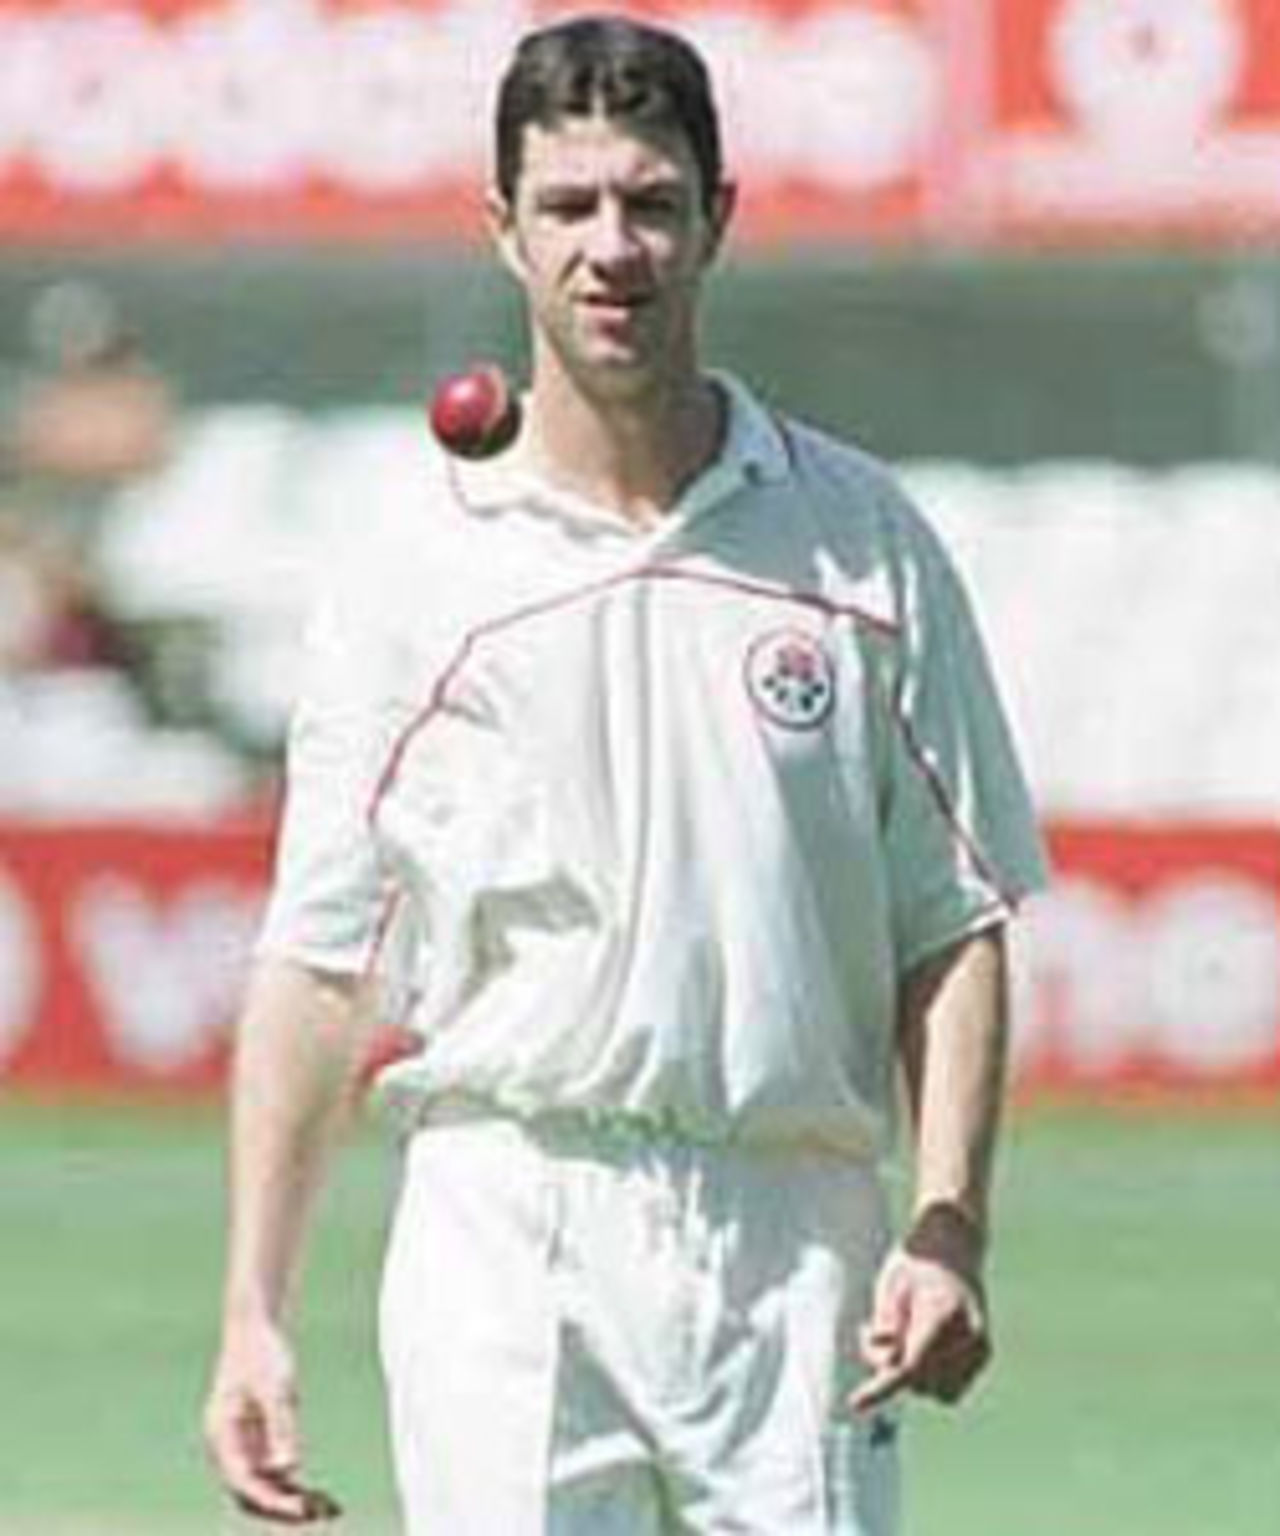 Smethurst walks up to the top of his mark, PPP healthcare County Championship Division One, 2000, Surrey v Lancashire, Kennington Oval, London, 02-05 August 2000(Day 1).